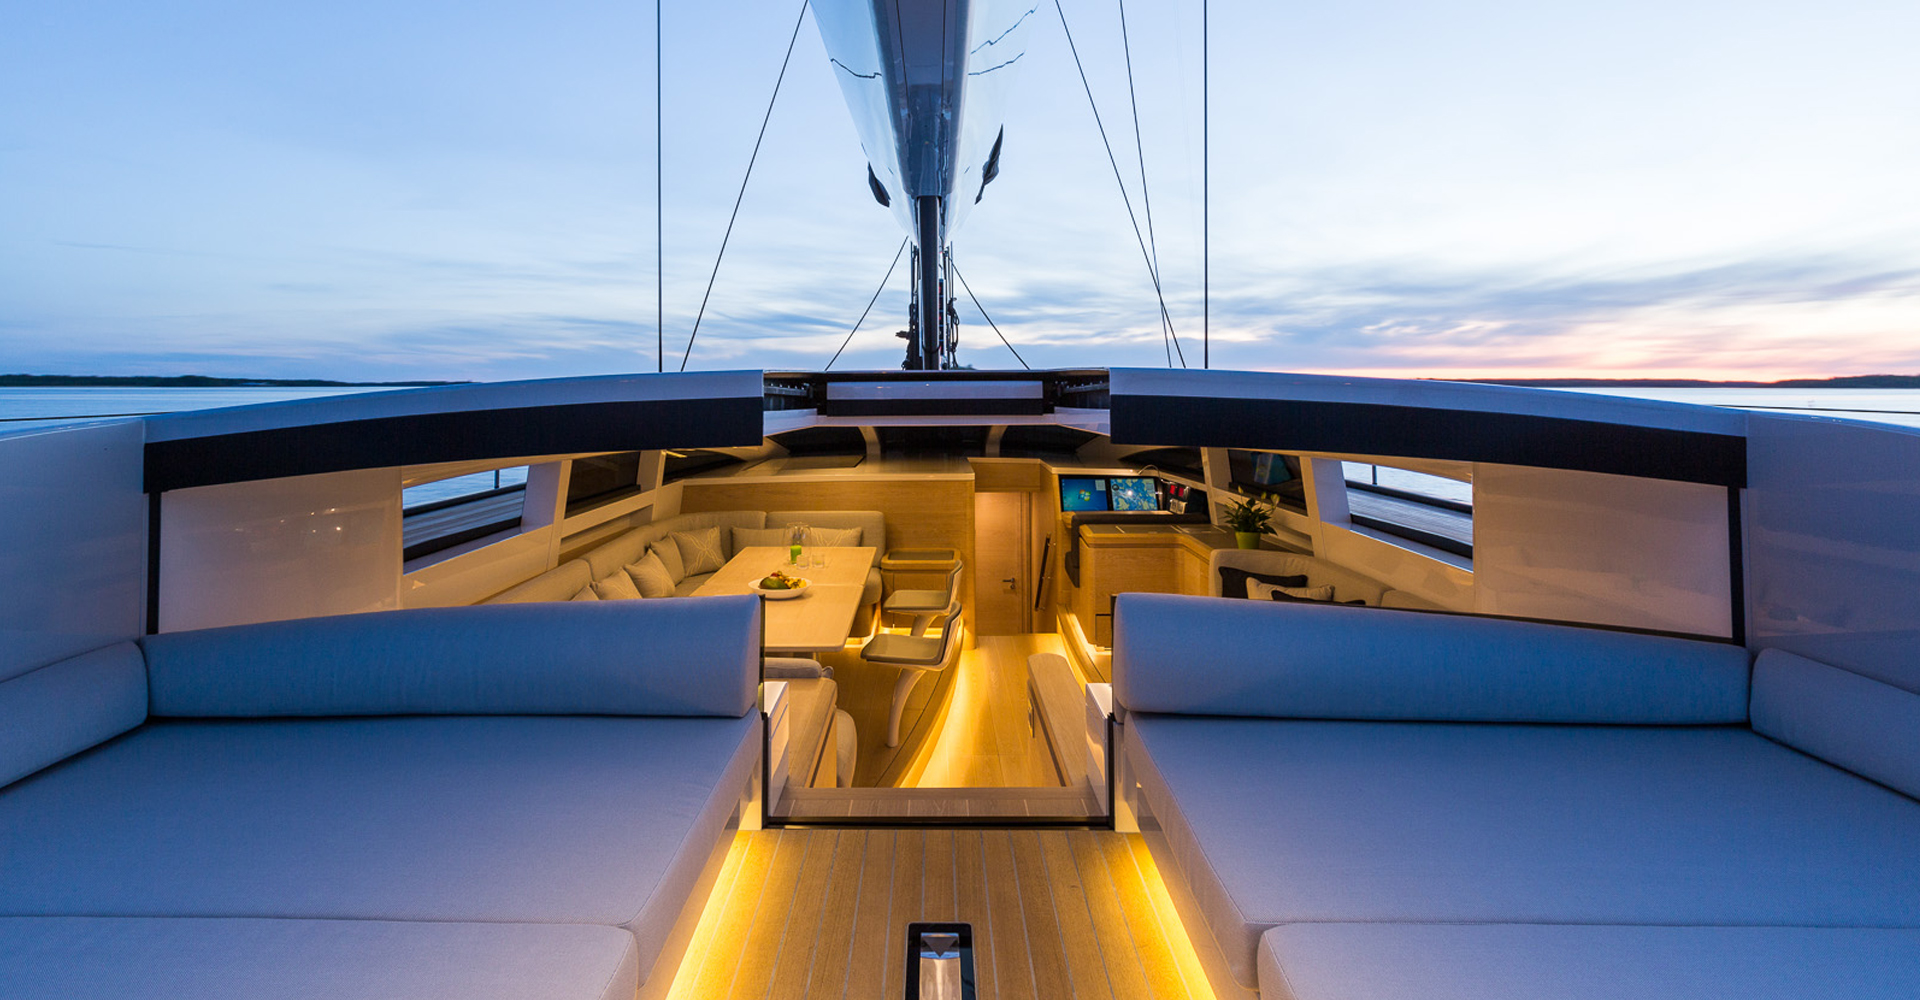 Sailing yacht WinWin was built by Baltic Yachts